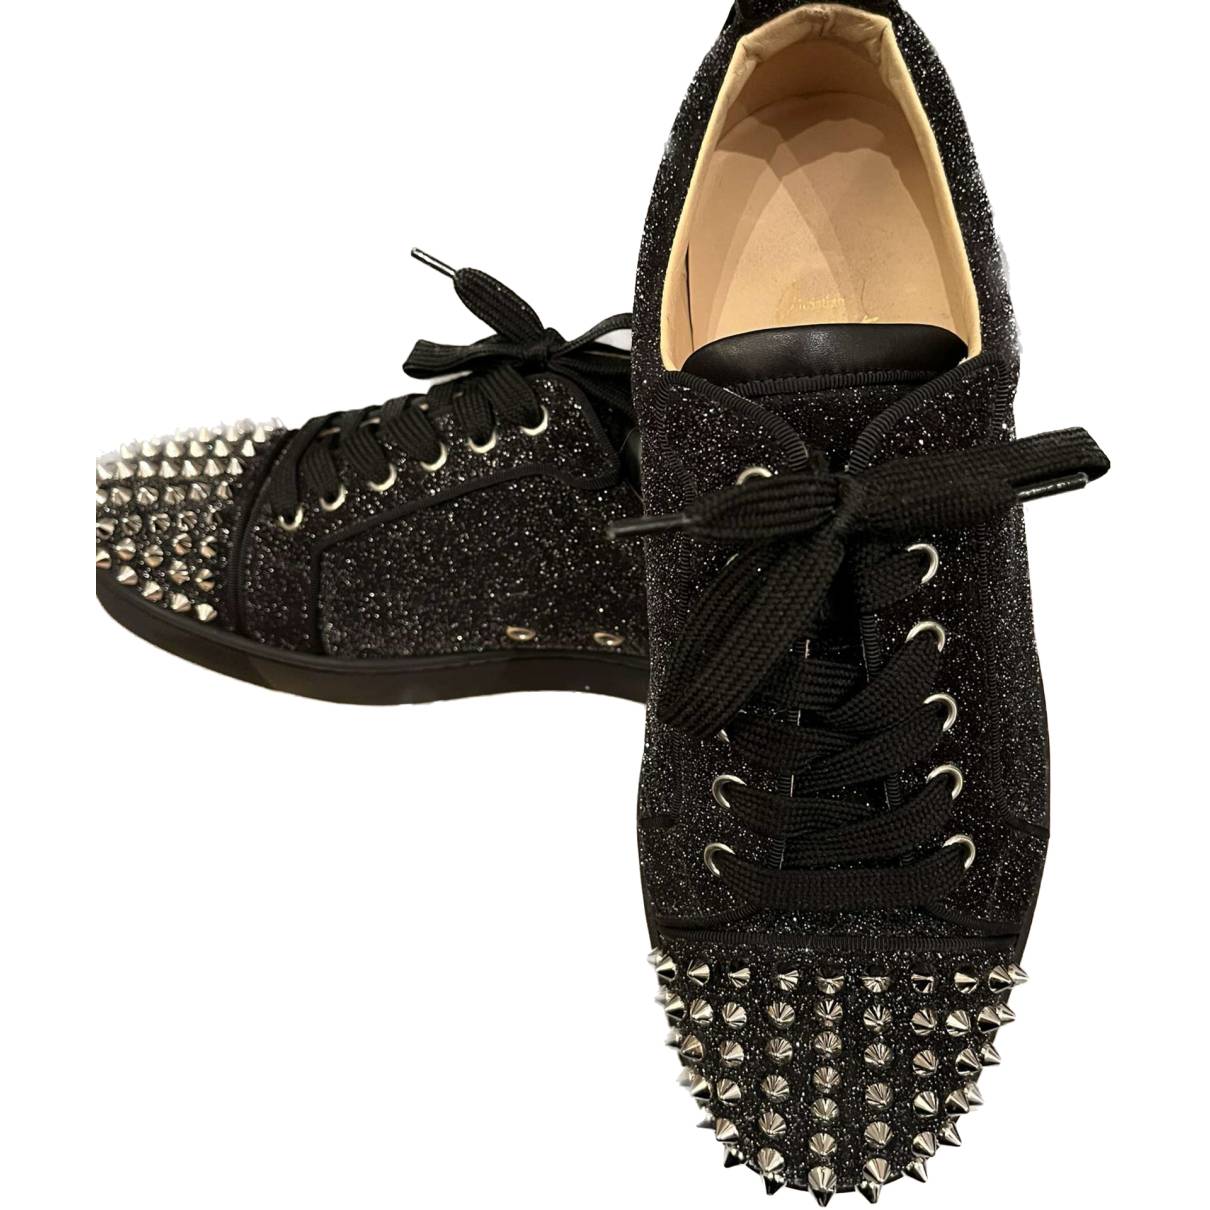 Christian Louboutin - Authenticated Louis Junior Spike Trainer - Glitter Black for Men, Very Good Condition